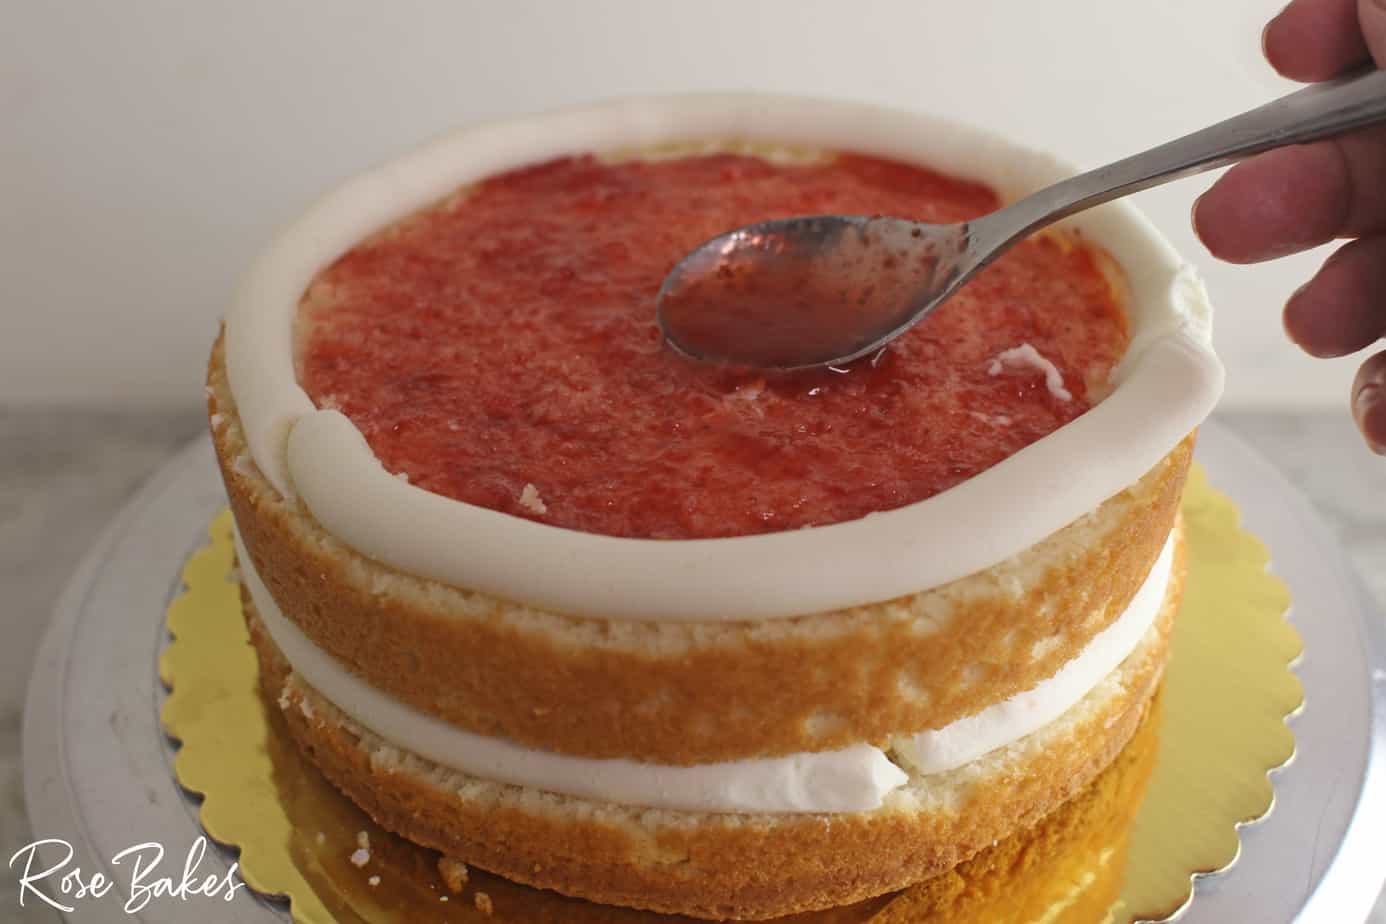 spreading fruit syrup on a cut layer of cake